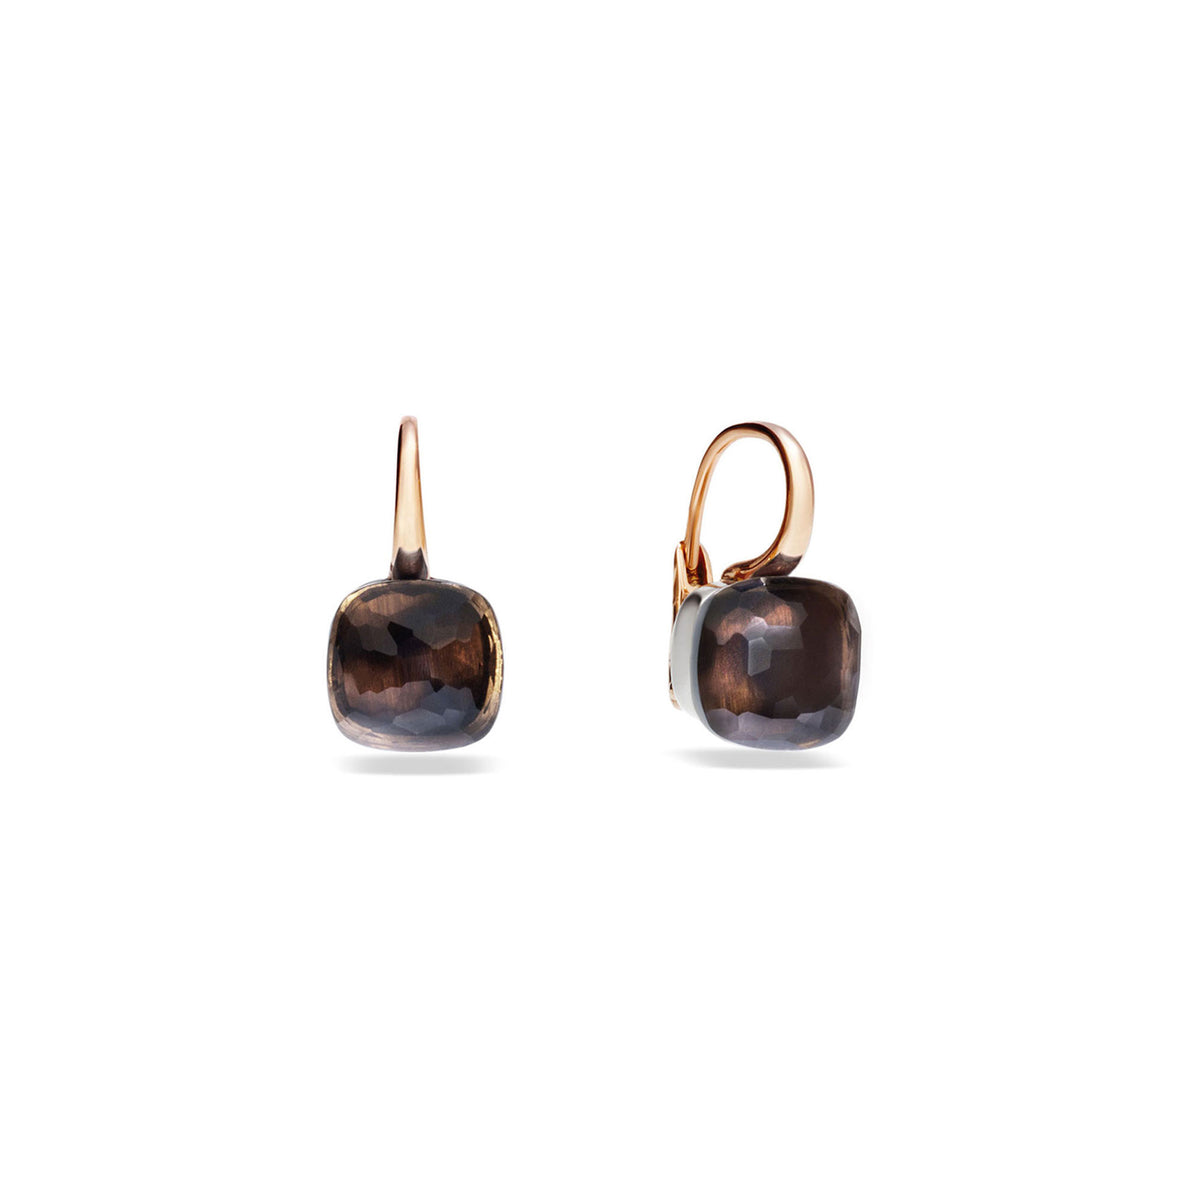 Nudo Classic Earrings in 18k Rose and White Gold with Smoky Quartz - Orsini Jewellers NZ